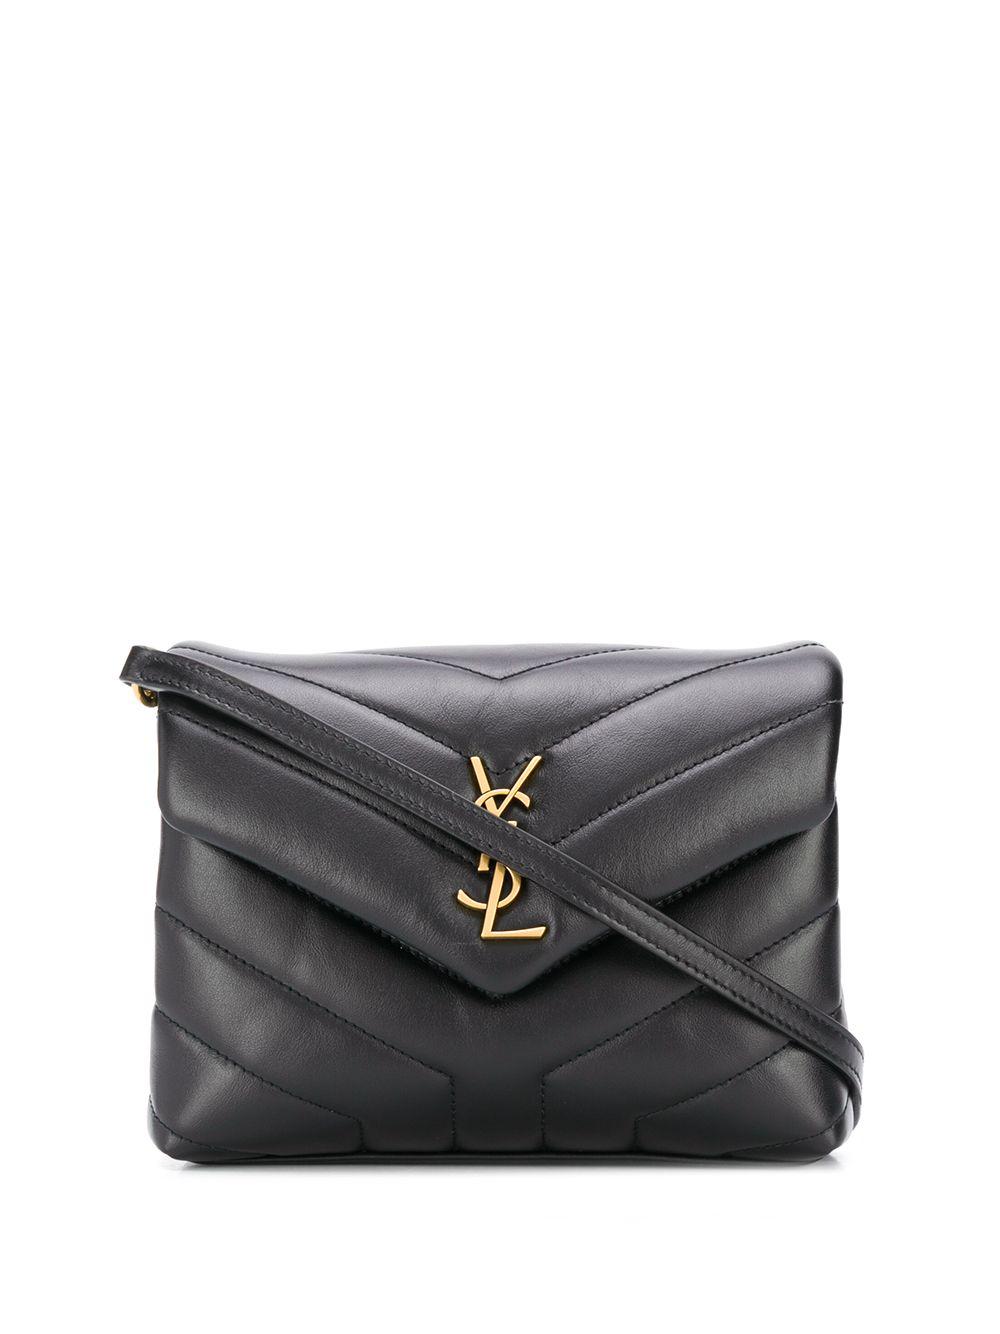 Saint Laurent Leather Women S Smlg in Black - Save 37% | Lyst